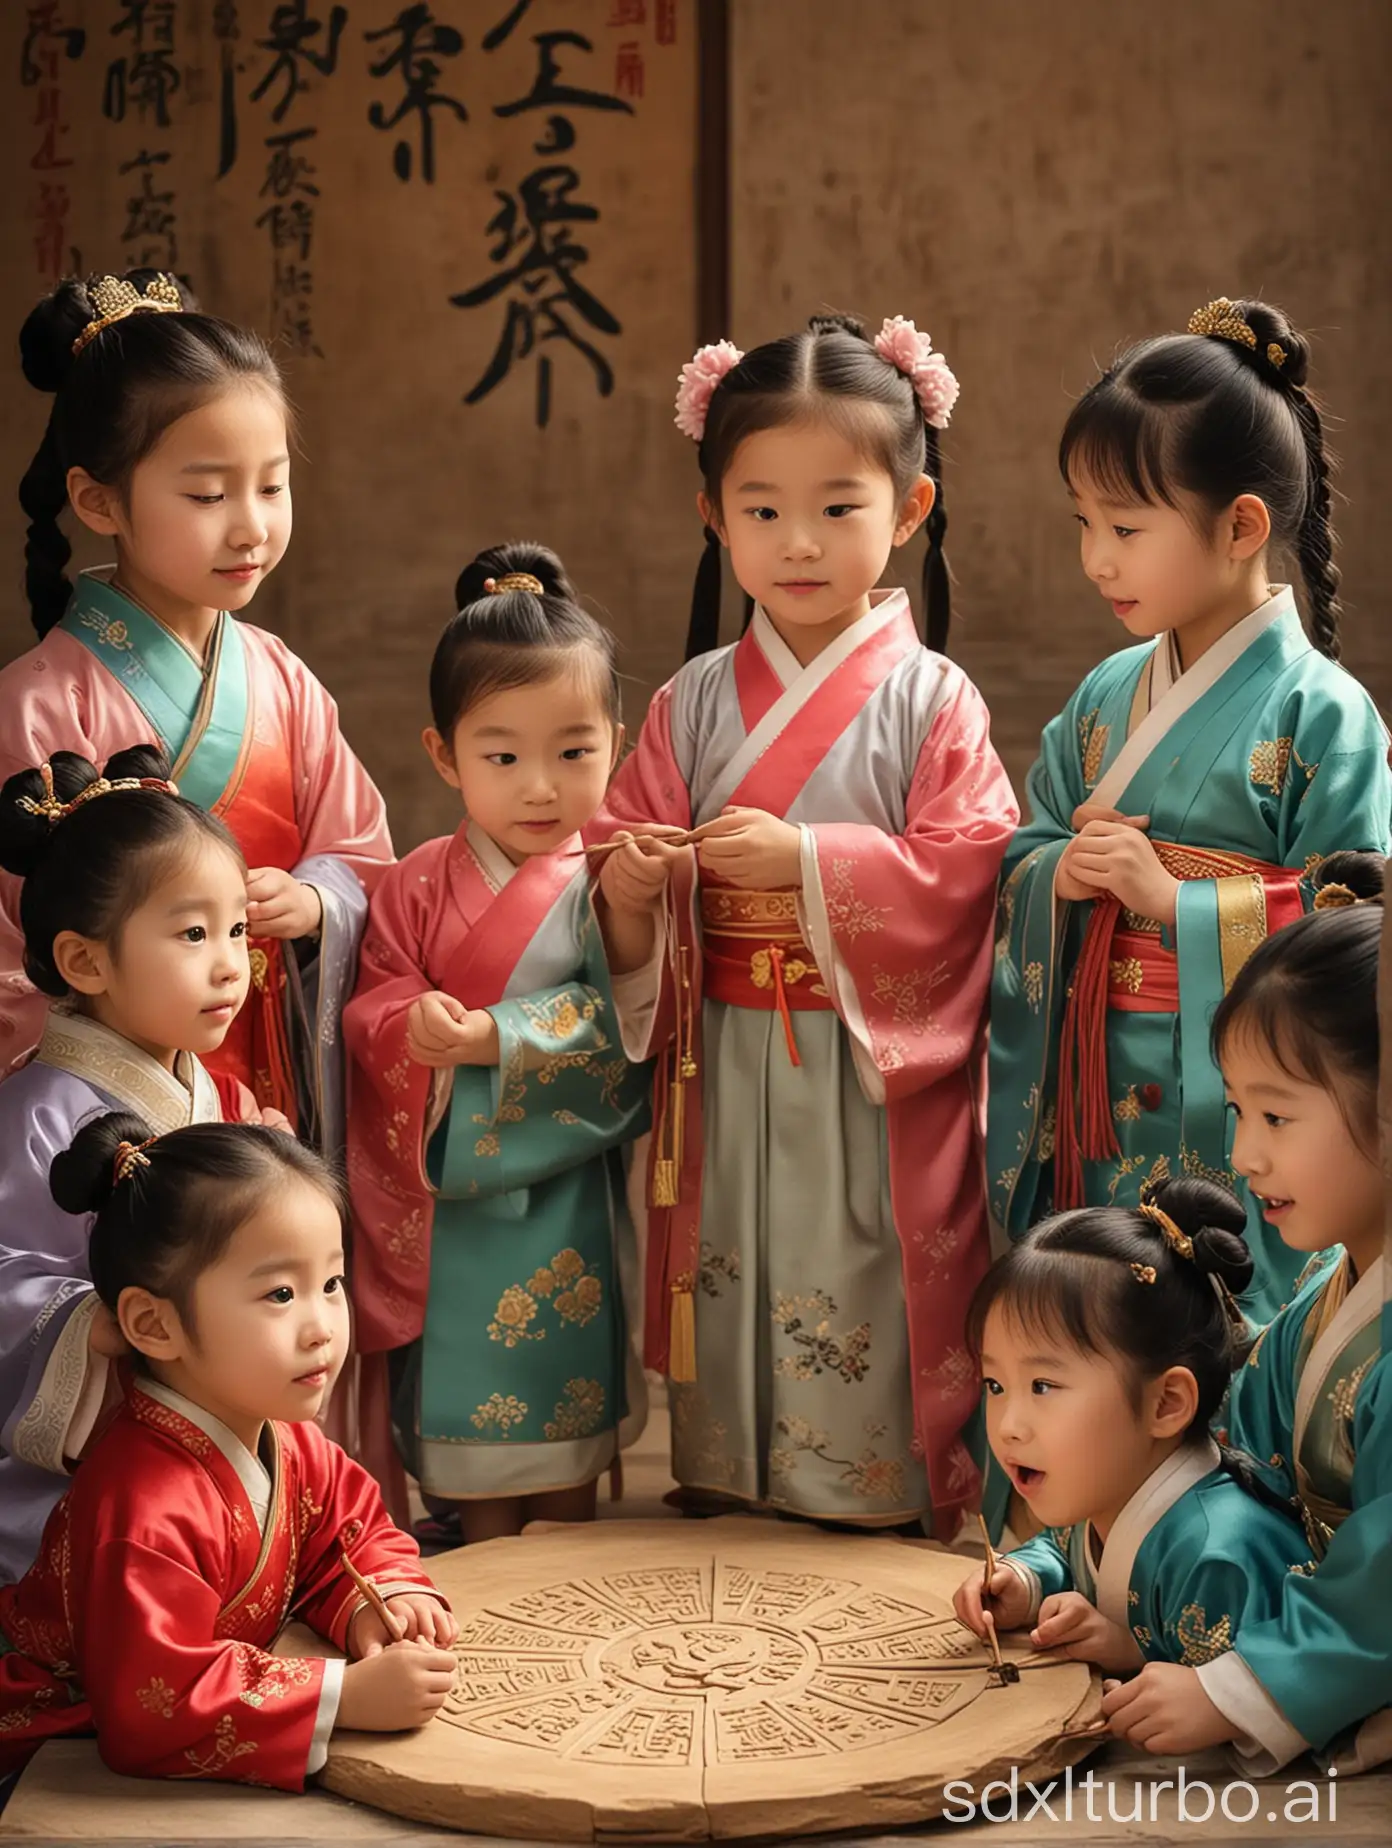 Chinese children in ancient times learn